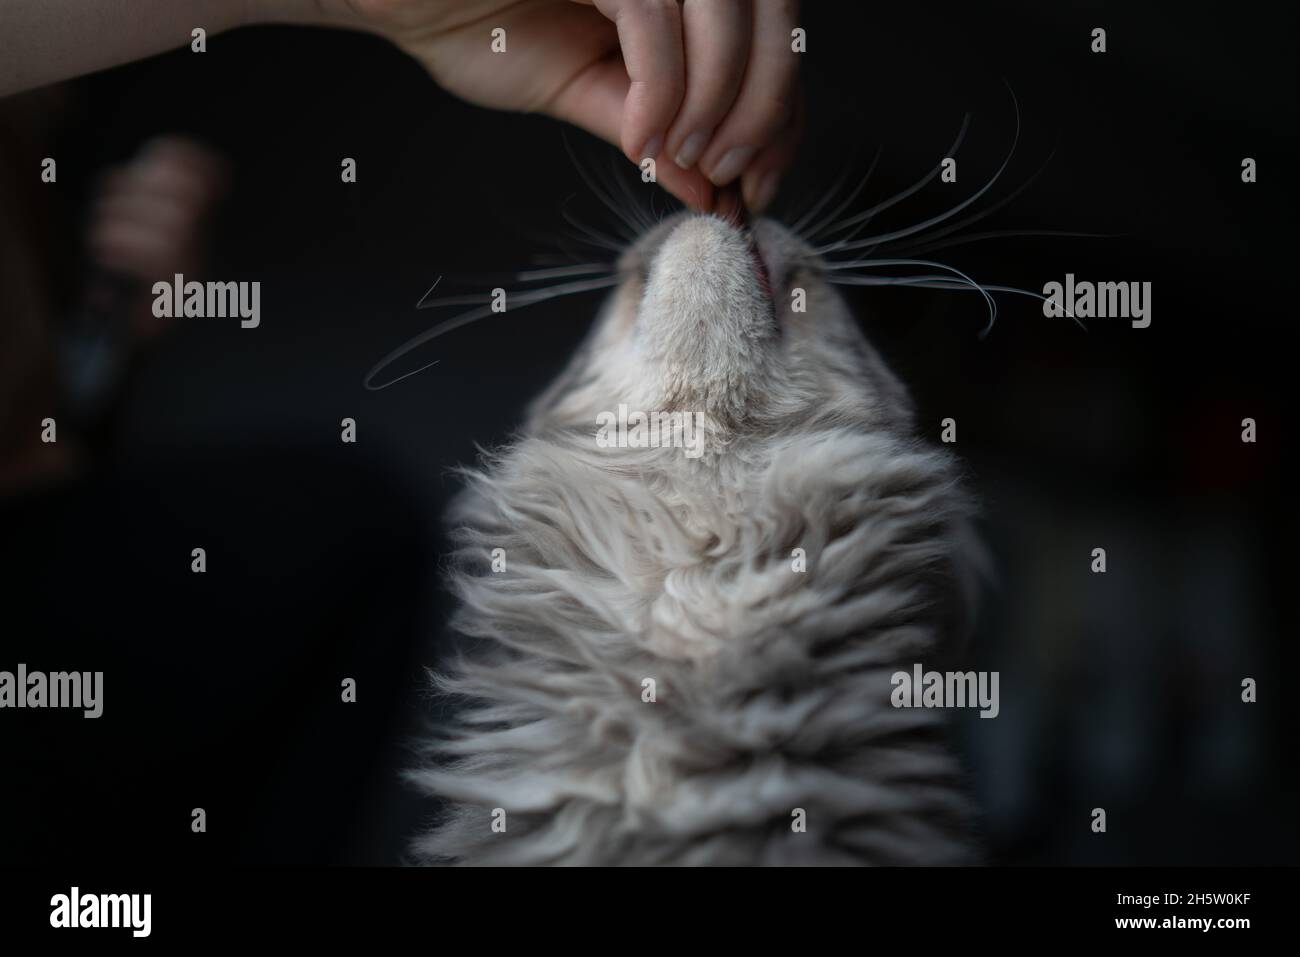 studio portrait of a blue tabby maine coon cat with mouth open getting fed with treats by humand hand Stock Photo